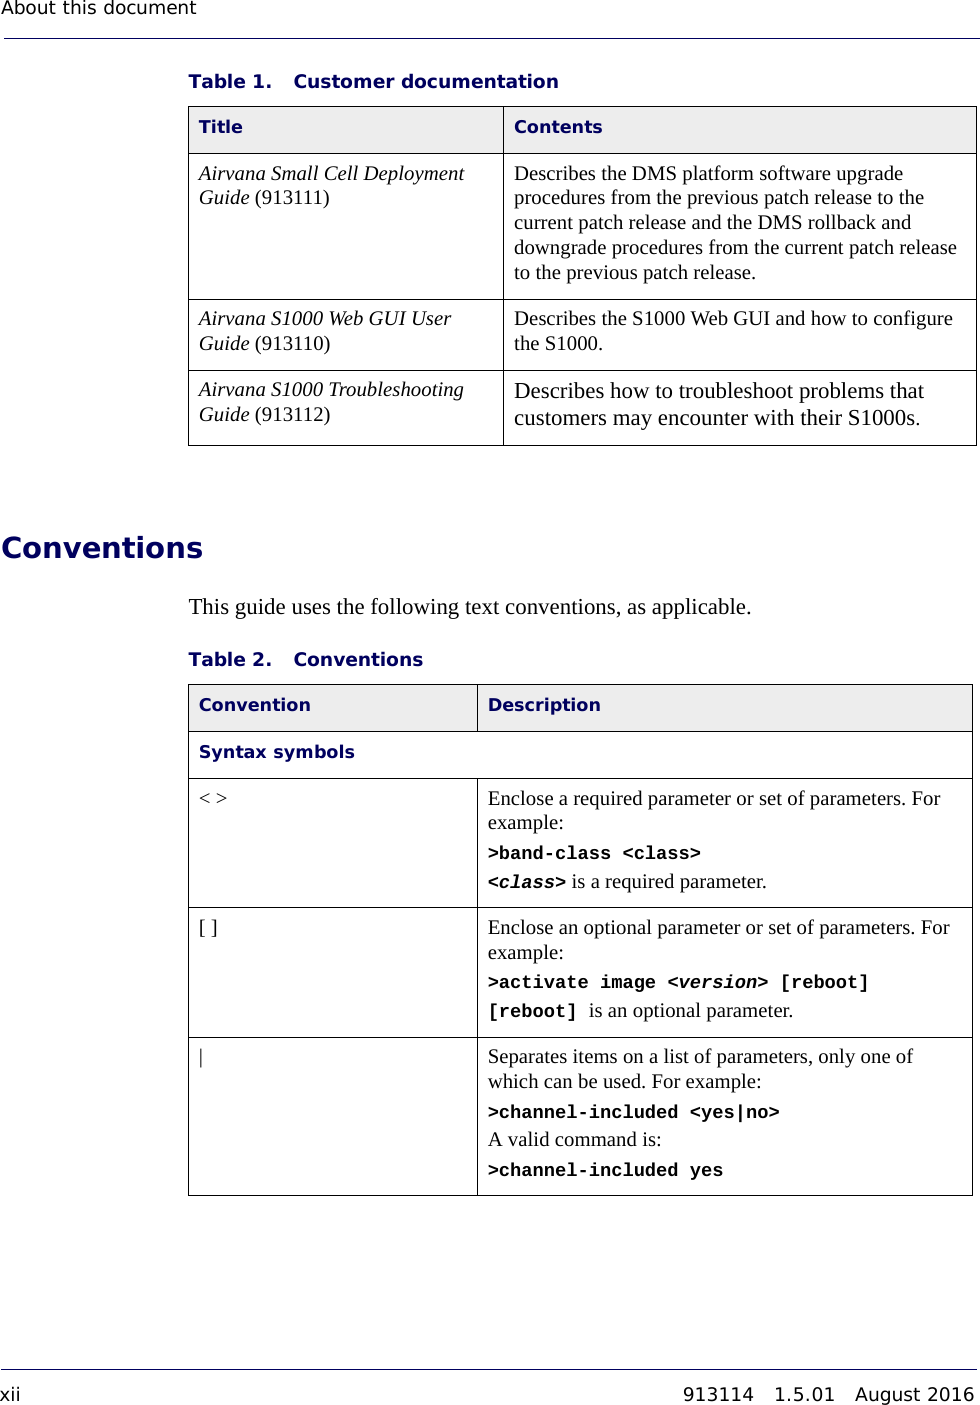 About this document xii 913114   1.5.01   August 2016DRAFTConventionsThis guide uses the following text conventions, as applicable.Airvana Small Cell Deployment Guide (913111) Describes the DMS platform software upgrade procedures from the previous patch release to the current patch release and the DMS rollback and downgrade procedures from the current patch release to the previous patch release. Airvana S1000 Web GUI User Guide (913110) Describes the S1000 Web GUI and how to configure the S1000. Airvana S1000 Troubleshooting Guide (913112) Describes how to troubleshoot problems that customers may encounter with their S1000s.Table 1. Customer documentation Title ContentsTable 2. Conventions Convention DescriptionSyntax symbols&lt; &gt; Enclose a required parameter or set of parameters. For example:&gt;band-class &lt;class&gt;&lt;class&gt; is a required parameter.[ ] Enclose an optional parameter or set of parameters. For example:&gt;activate image &lt;version&gt; [reboot][reboot] is an optional parameter. |Separates items on a list of parameters, only one of which can be used. For example:&gt;channel-included &lt;yes|no&gt;A valid command is:&gt;channel-included yes